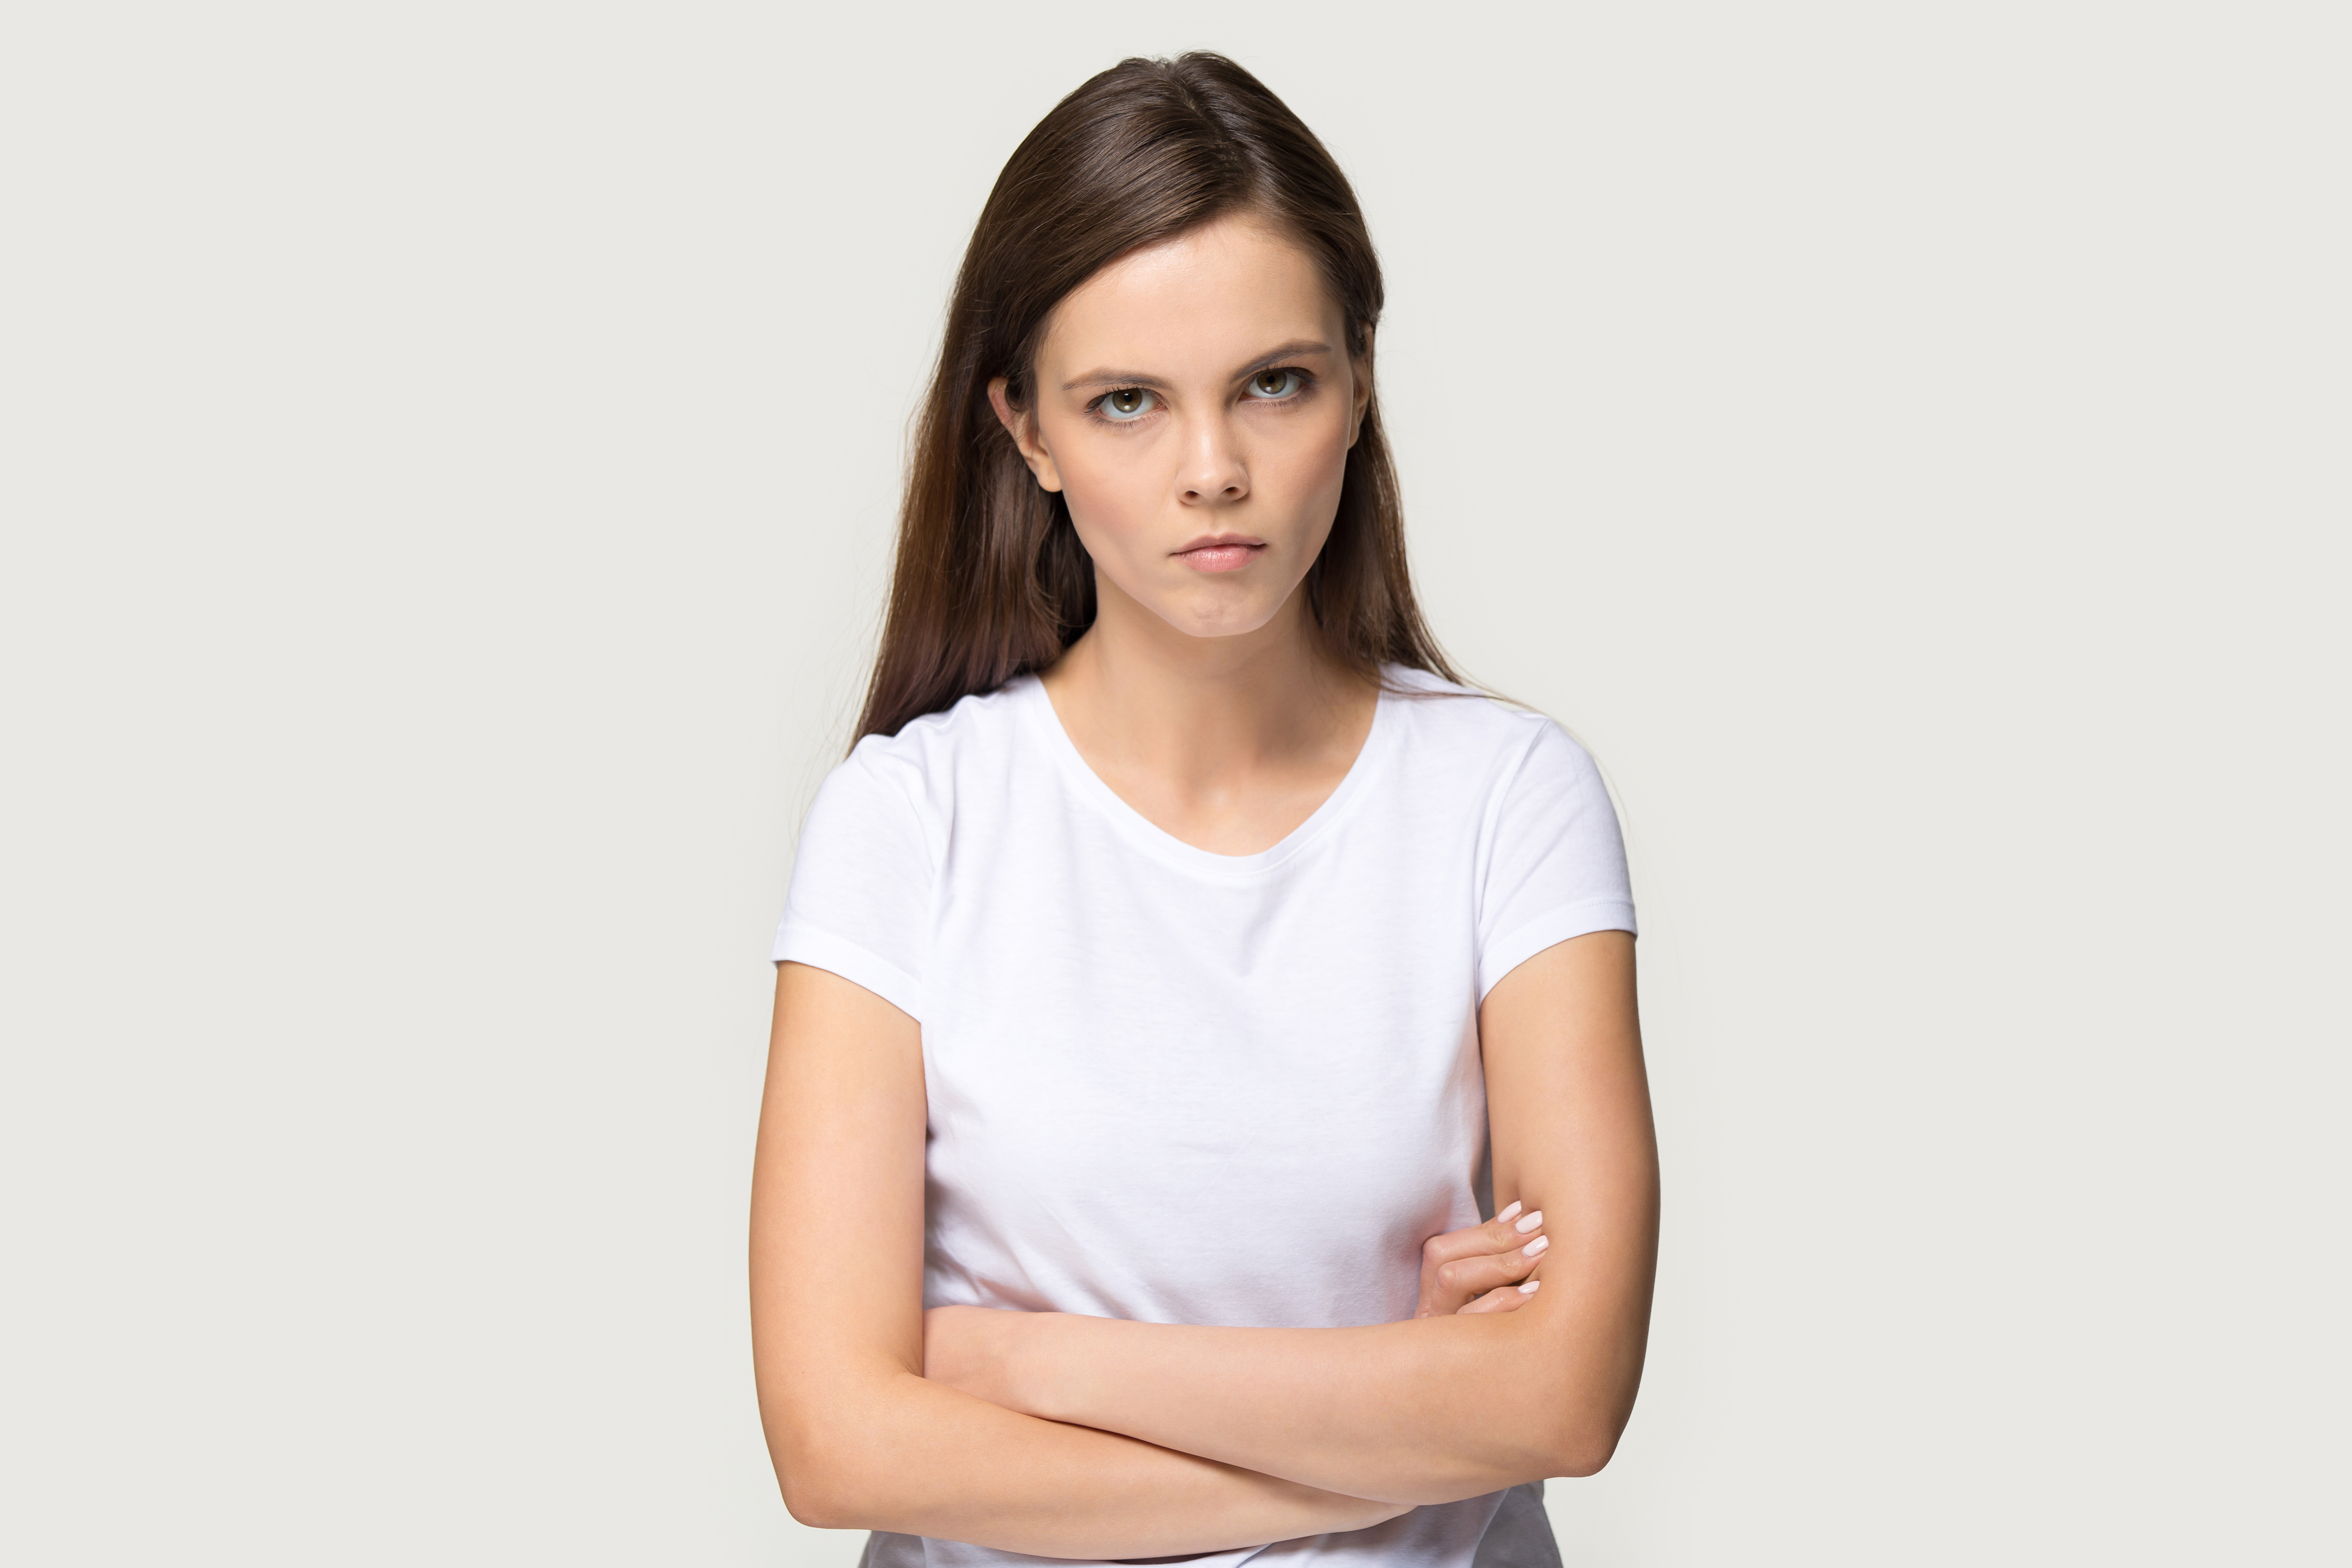 A young girl looking upset | Source: Shutterstock